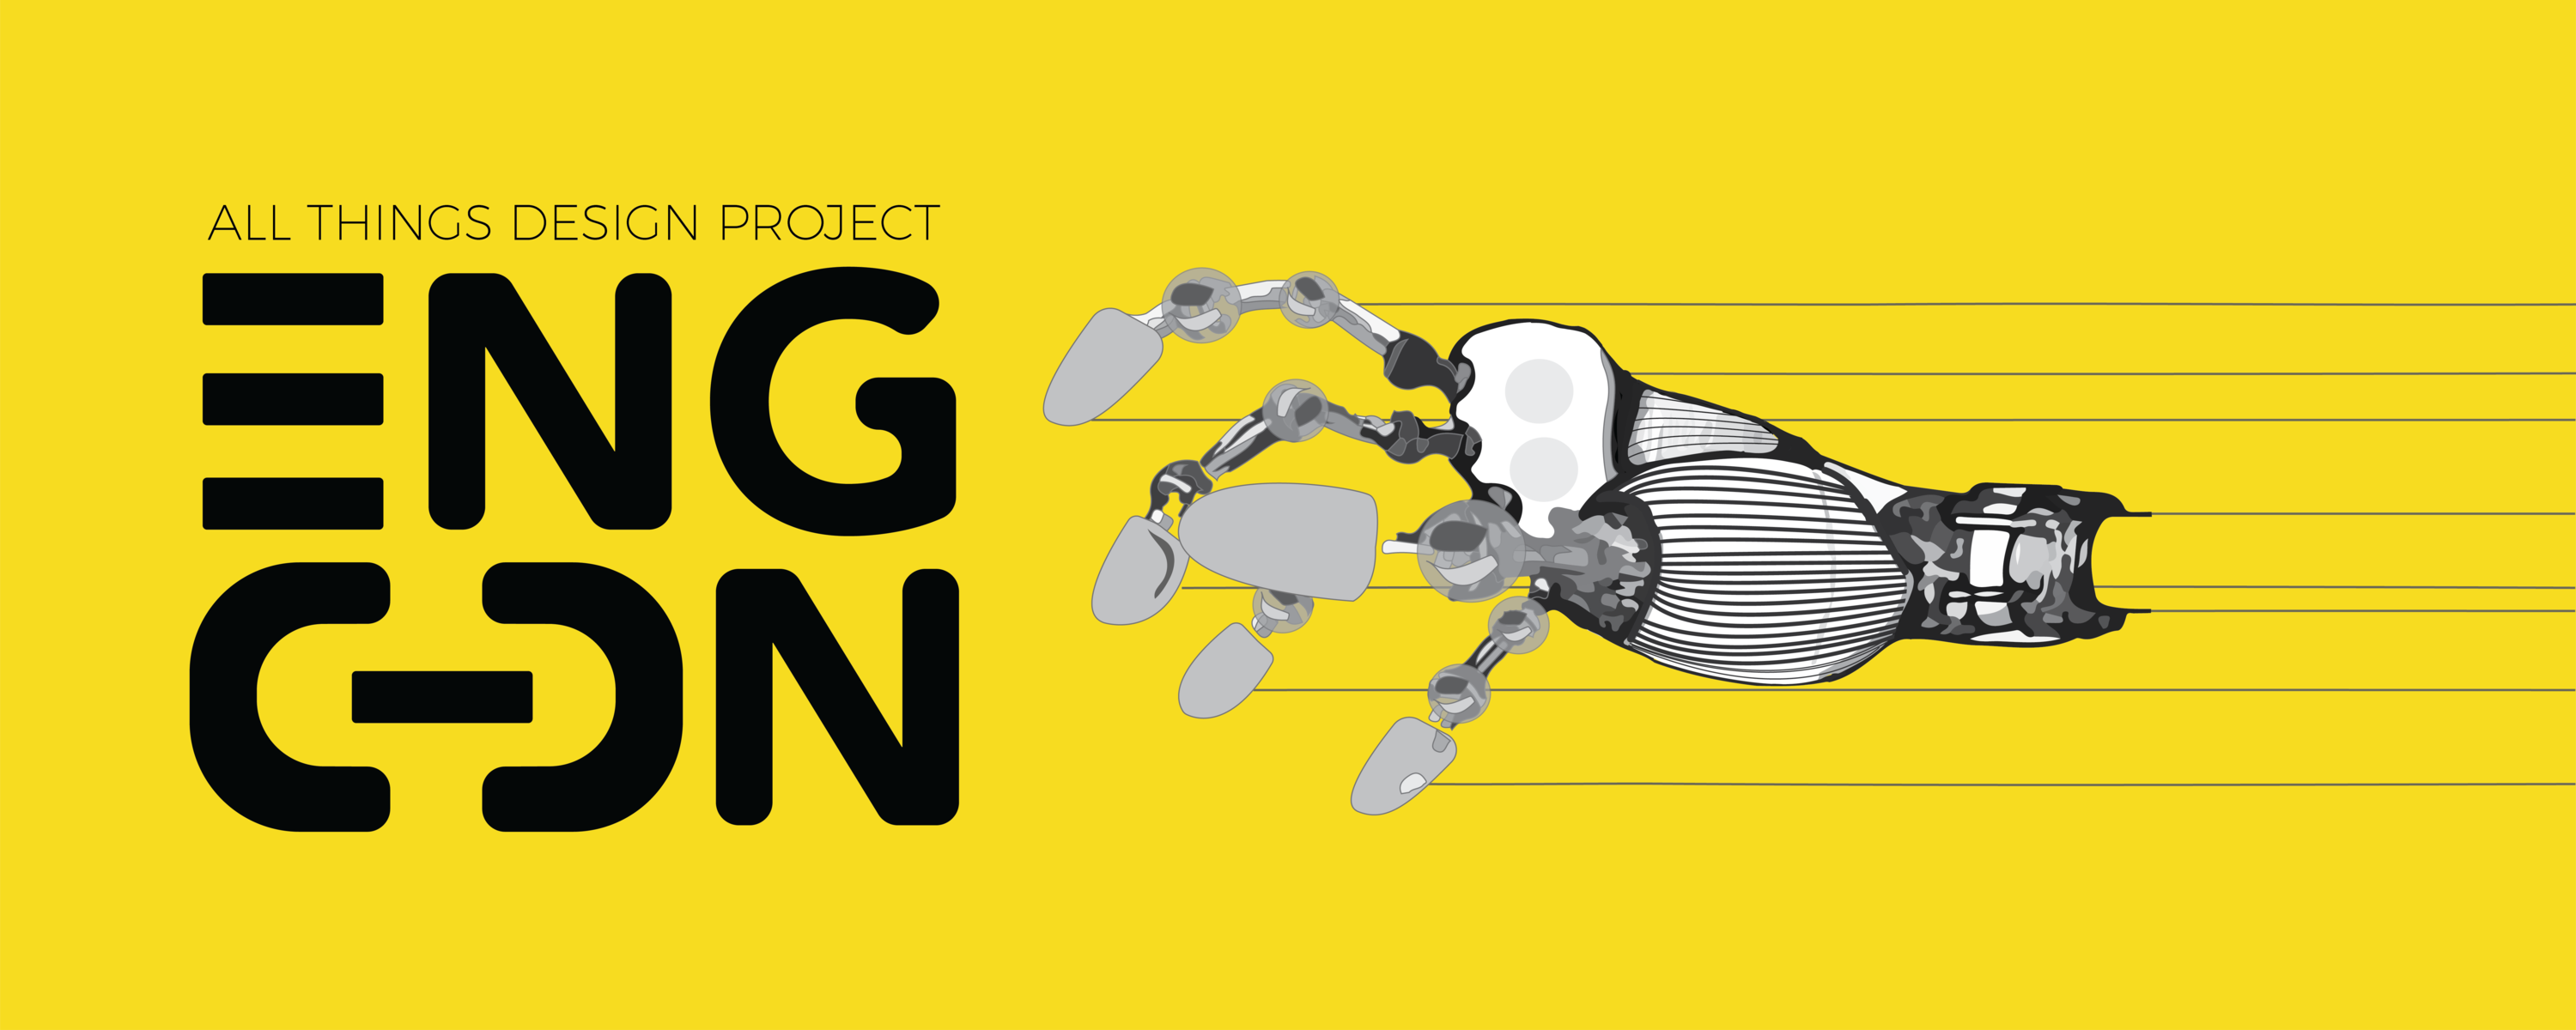 EngCon: All things design project